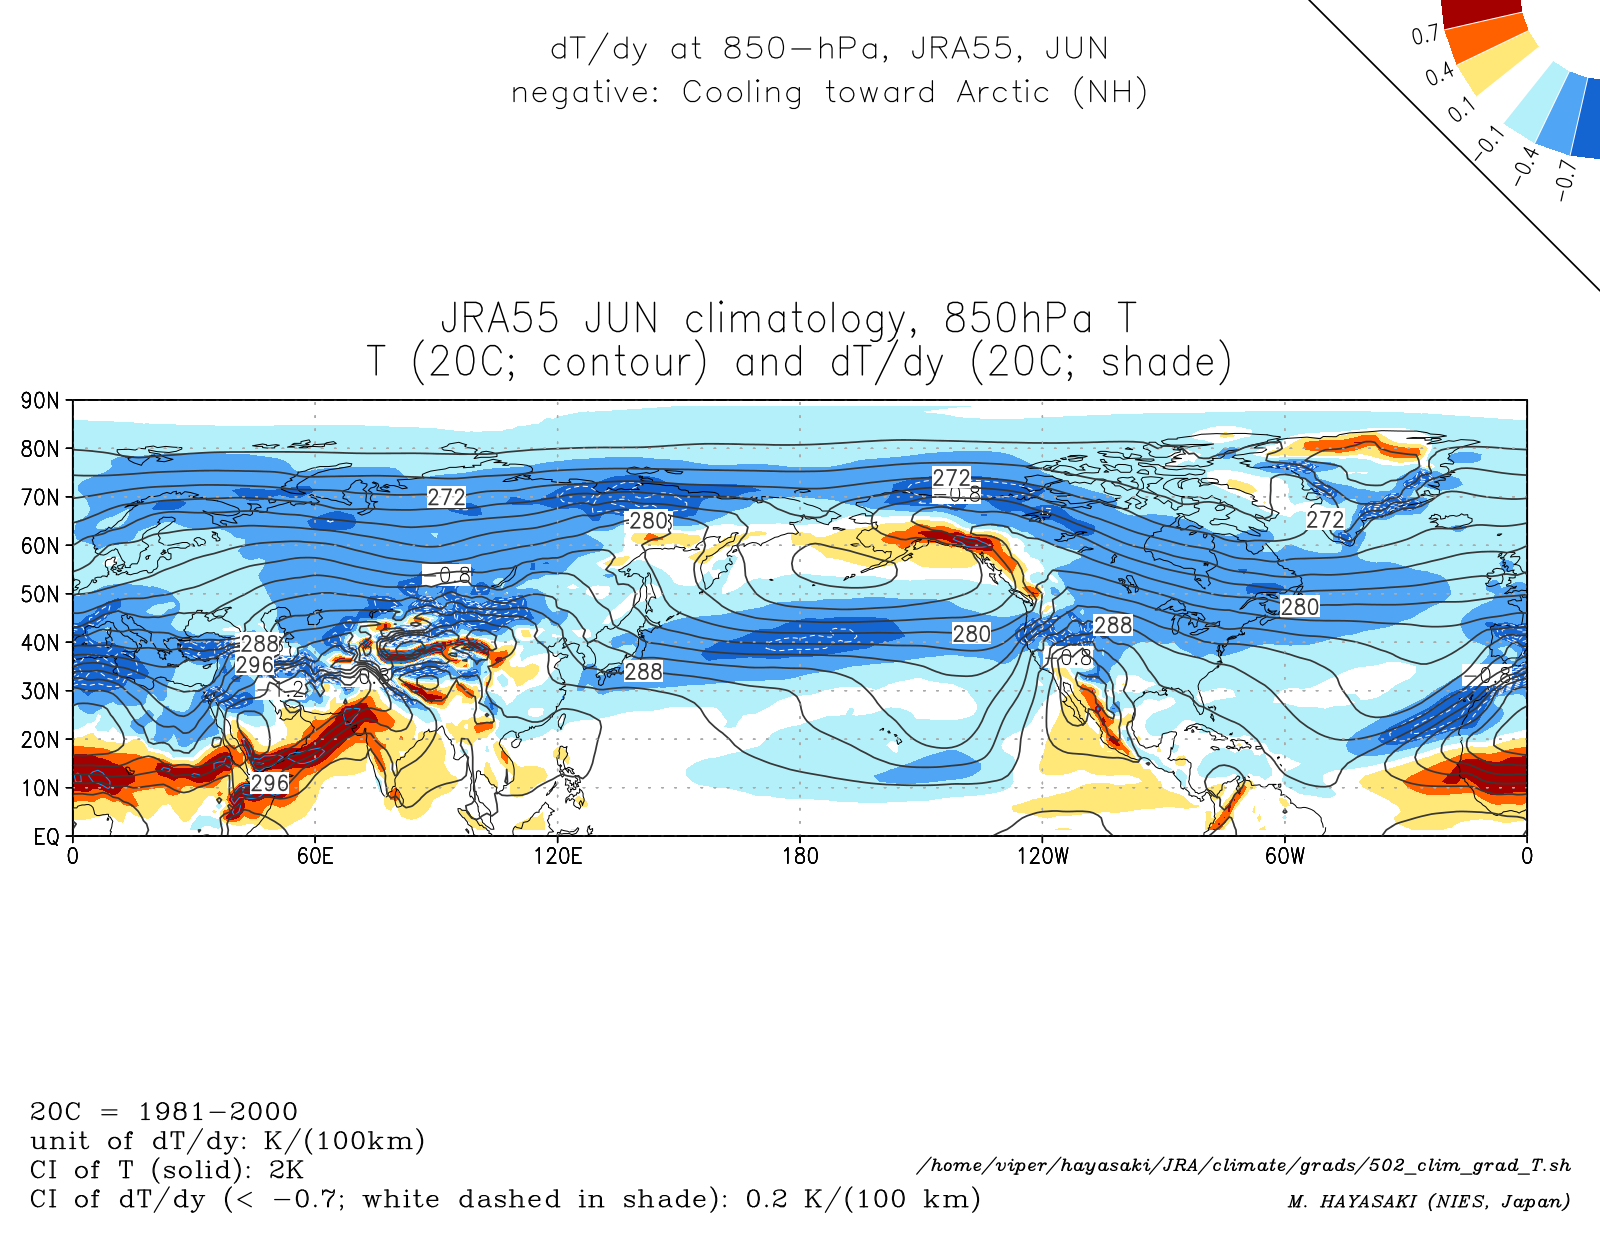 Monthly climatology (June) of dT/dy at 850-hPa in the NH